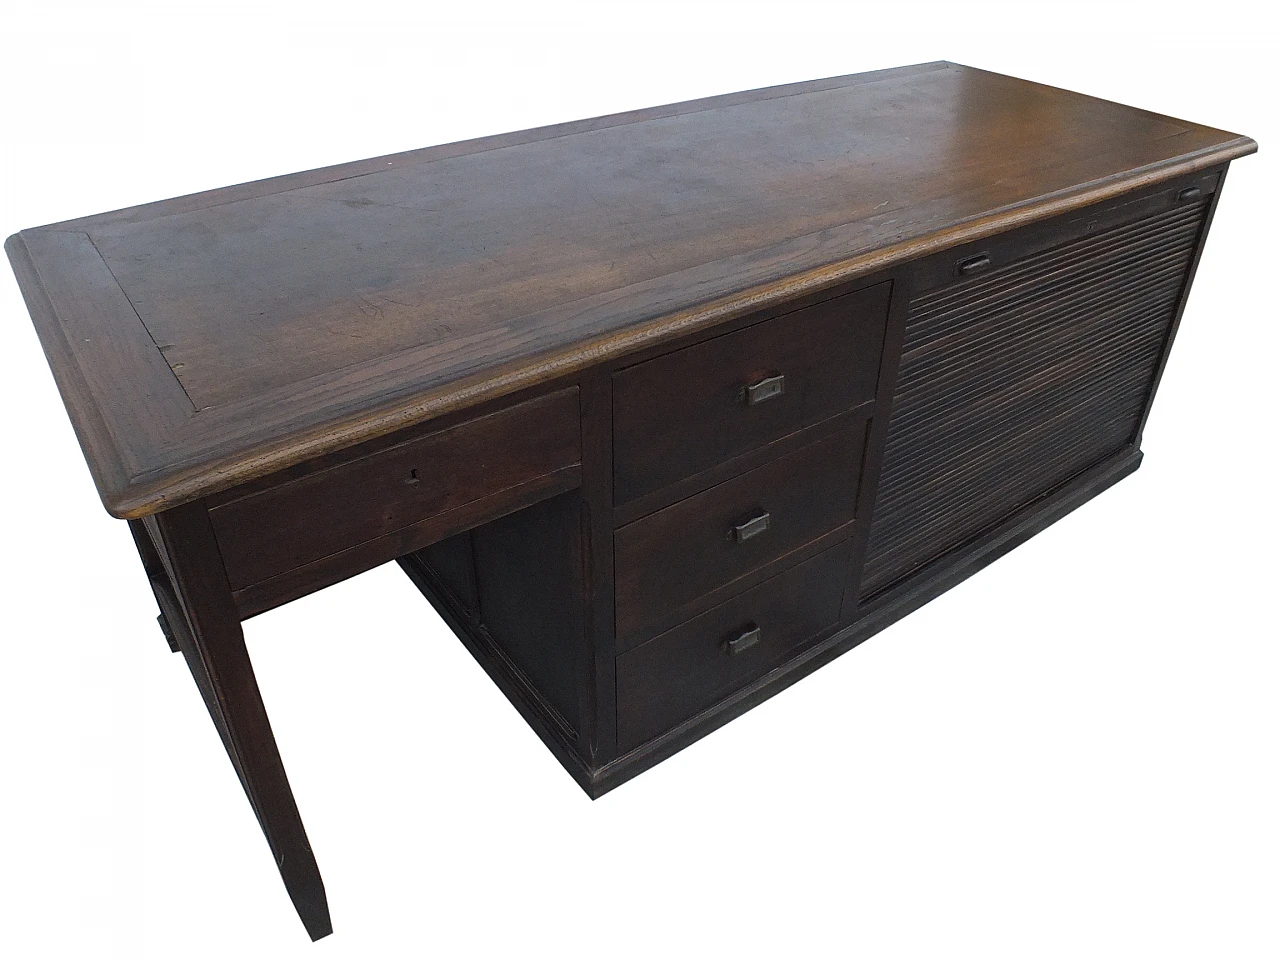 Chestnut shutter desk with drawers & compartments for projects, 1920s 11